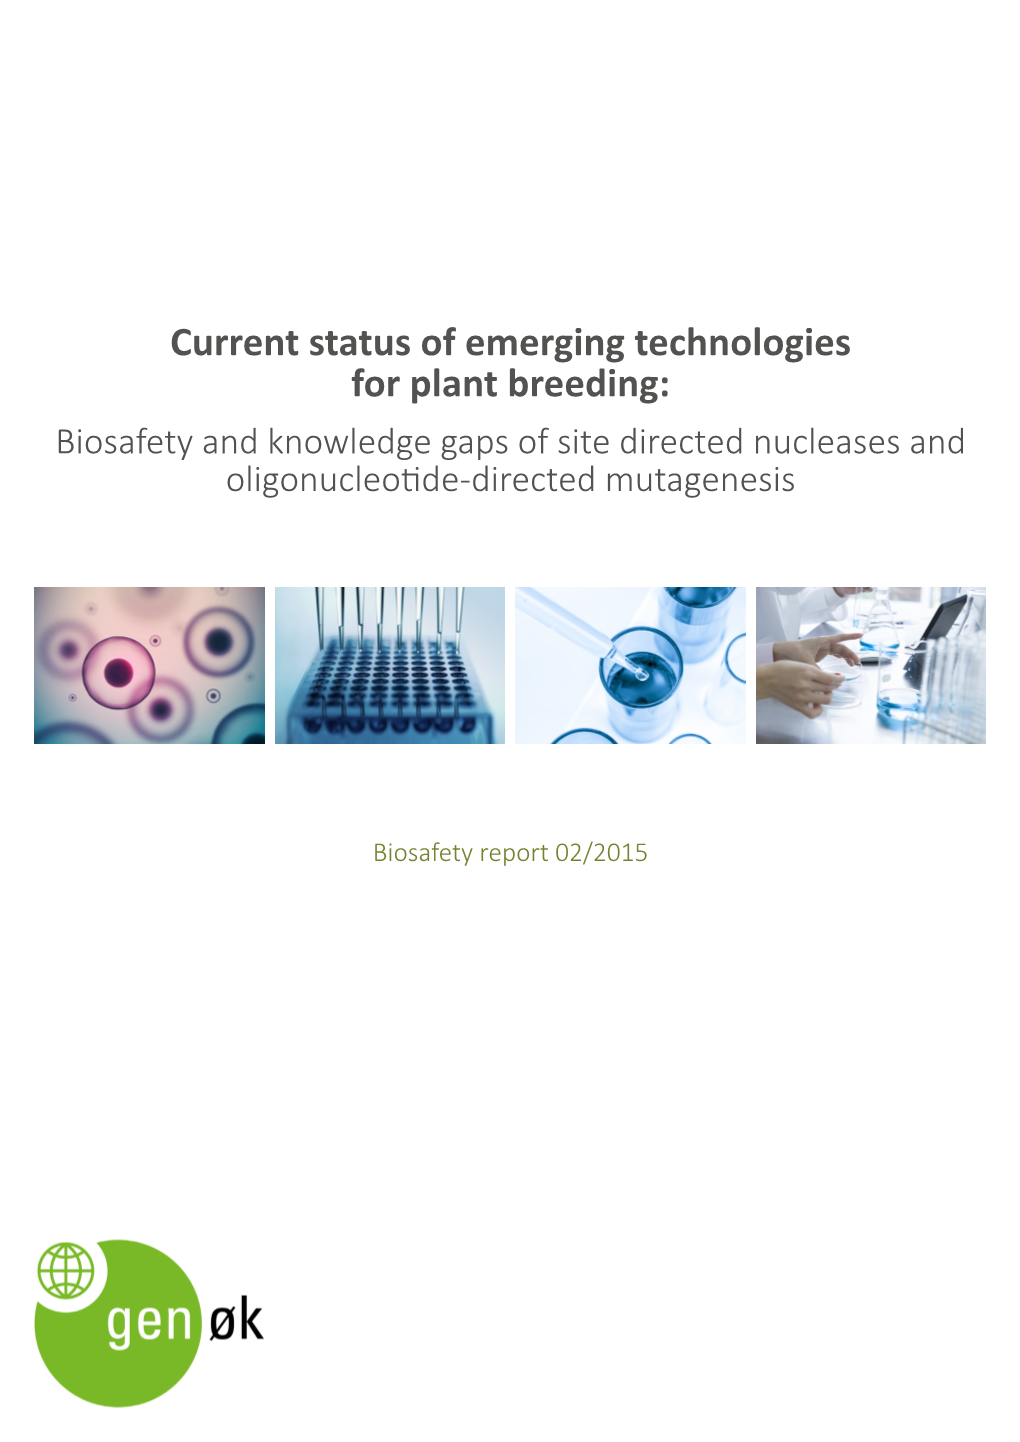 Current Status of Emerging Technologies for Plant Breeding: Biosafety and Knowledge Gaps of Site Directed Nucleases and Oligonucleotide-Directed Mutagenesis